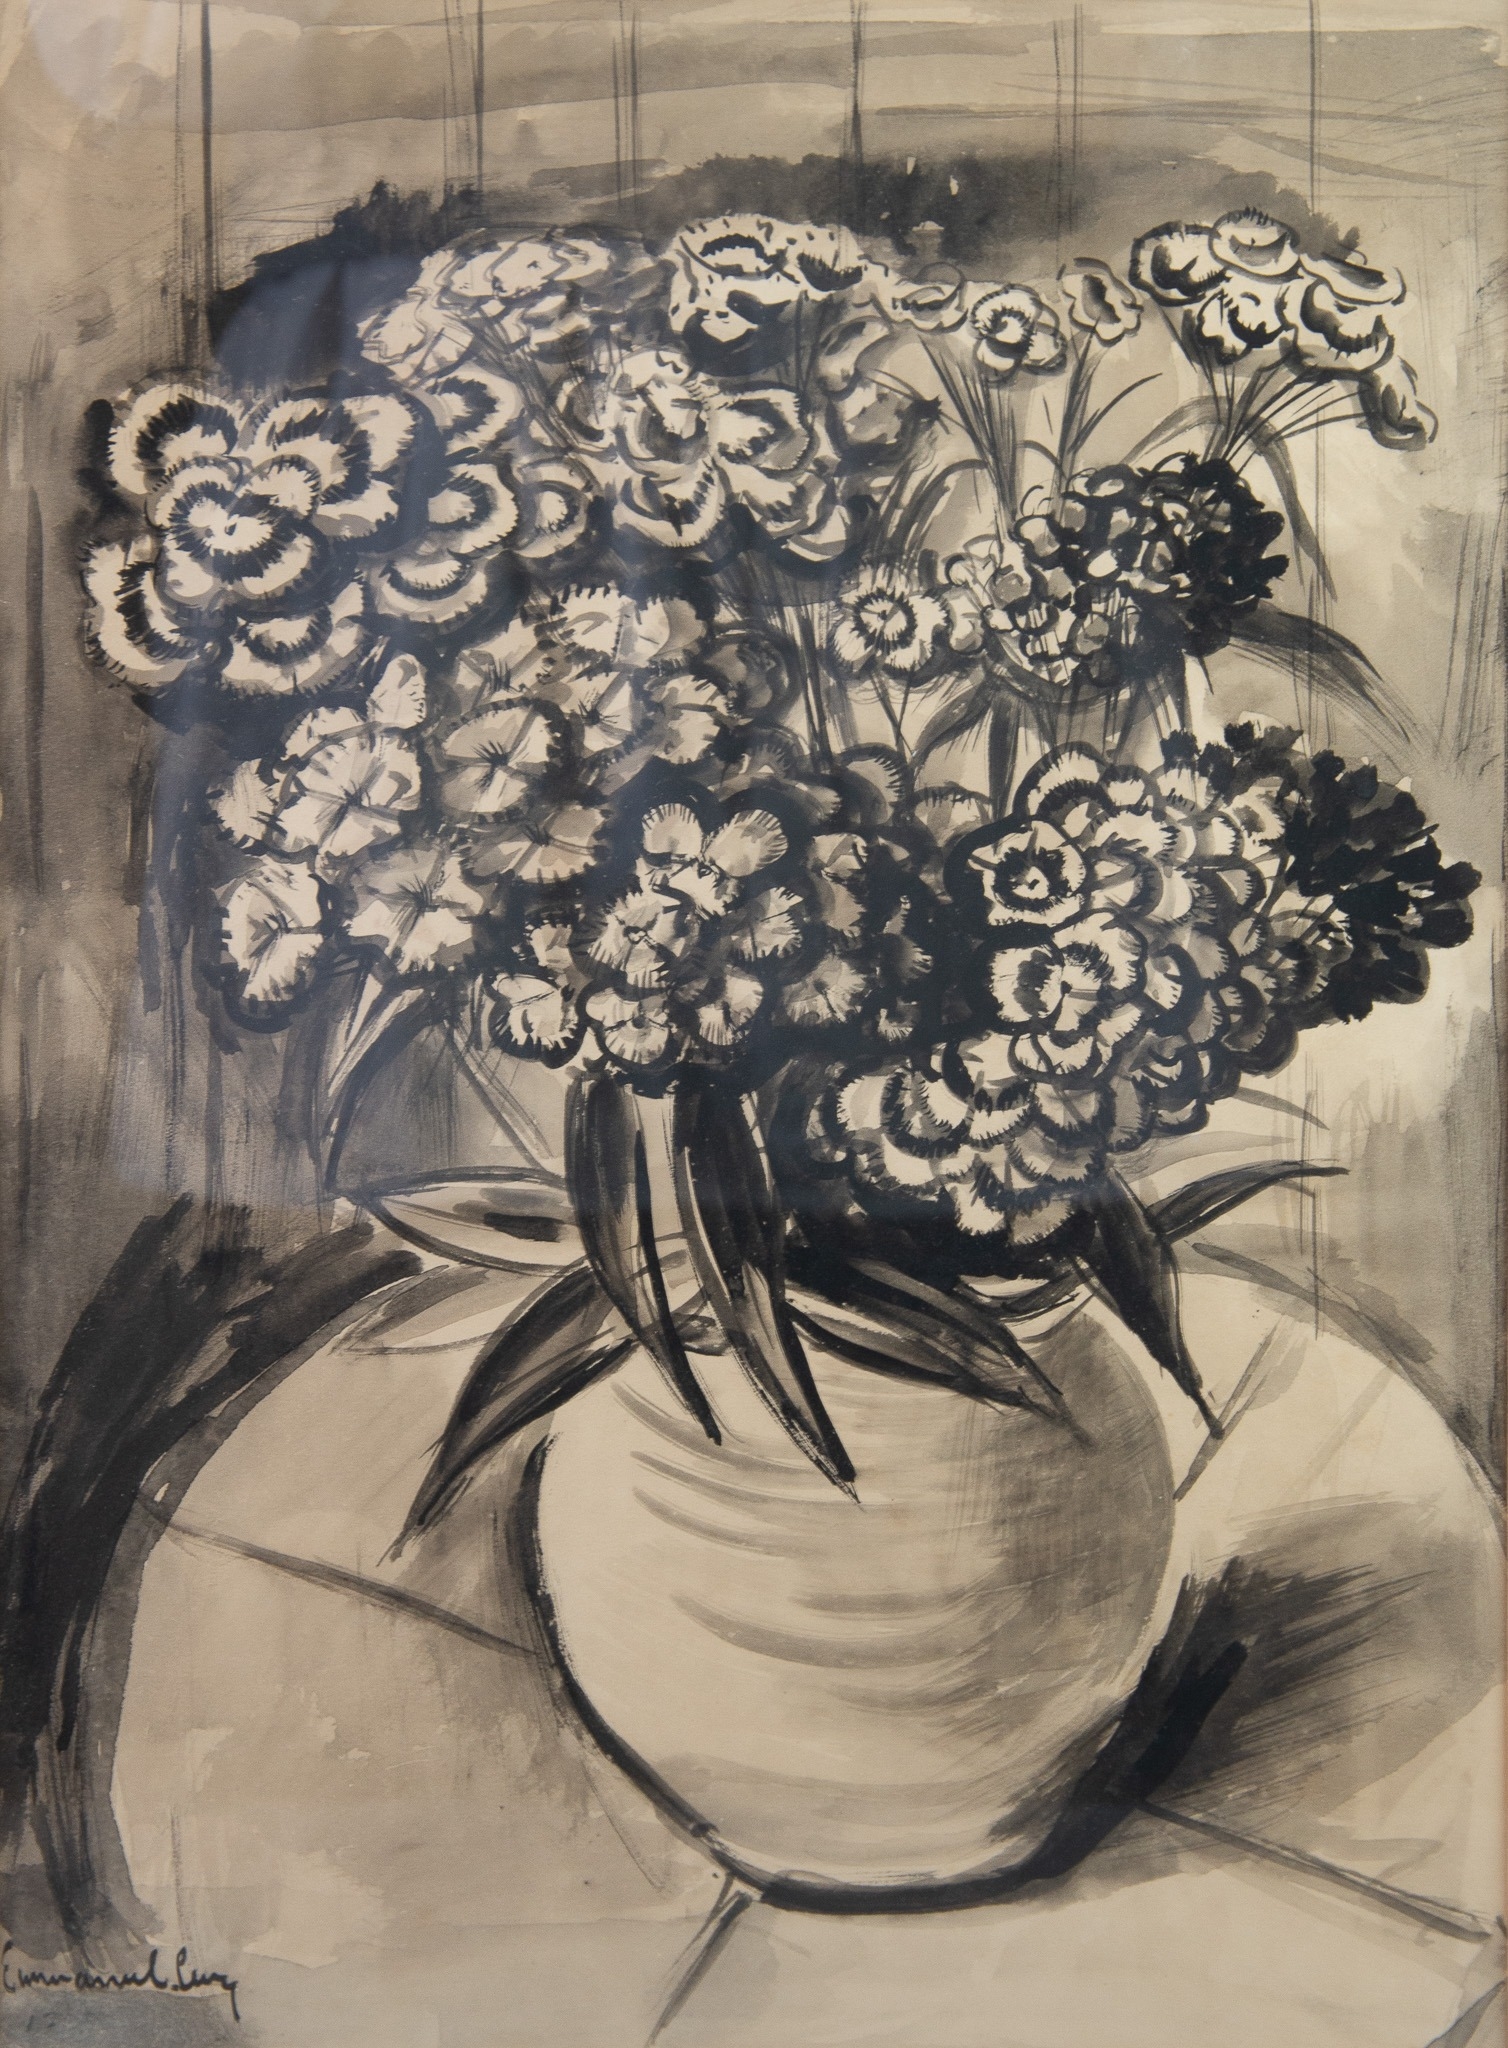 EMMANUEL LEVY (1900-1986) MONOCHROME WATERCOLOUR ON PAPER IN SHADES OF BLACK ‘Vase of Pansies’ on - Image 2 of 2